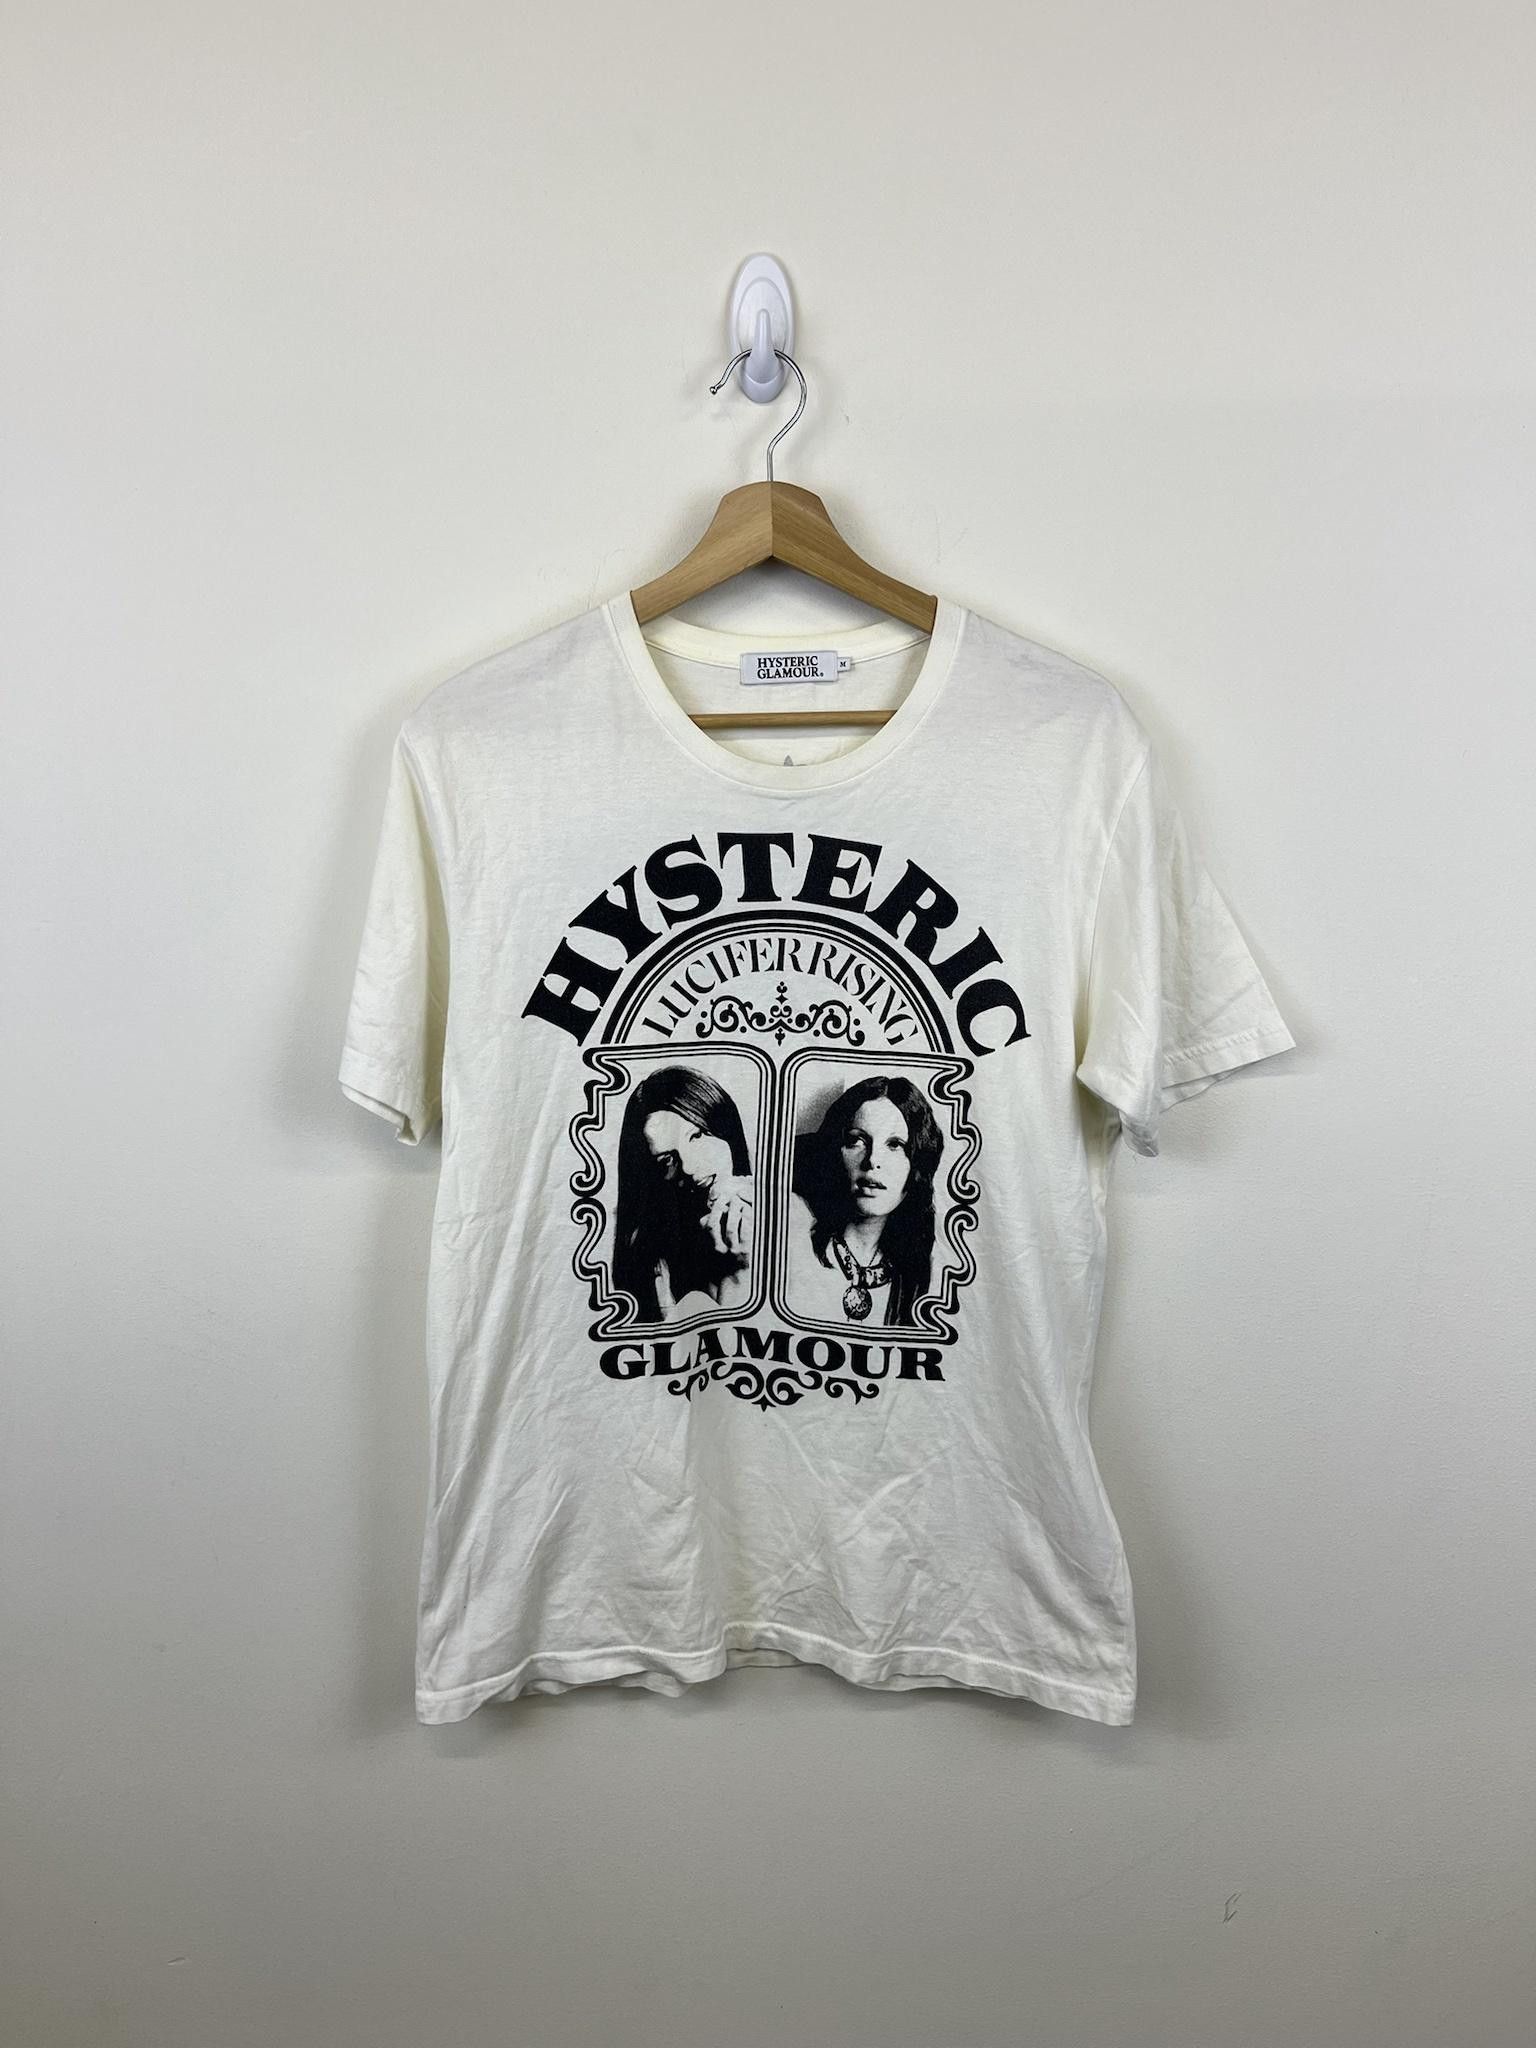 Hysteric Glamour Hysteric Glamour Lucifer Rising Girls Tee Size US M / EU 48-50 / 2 - 1 Preview